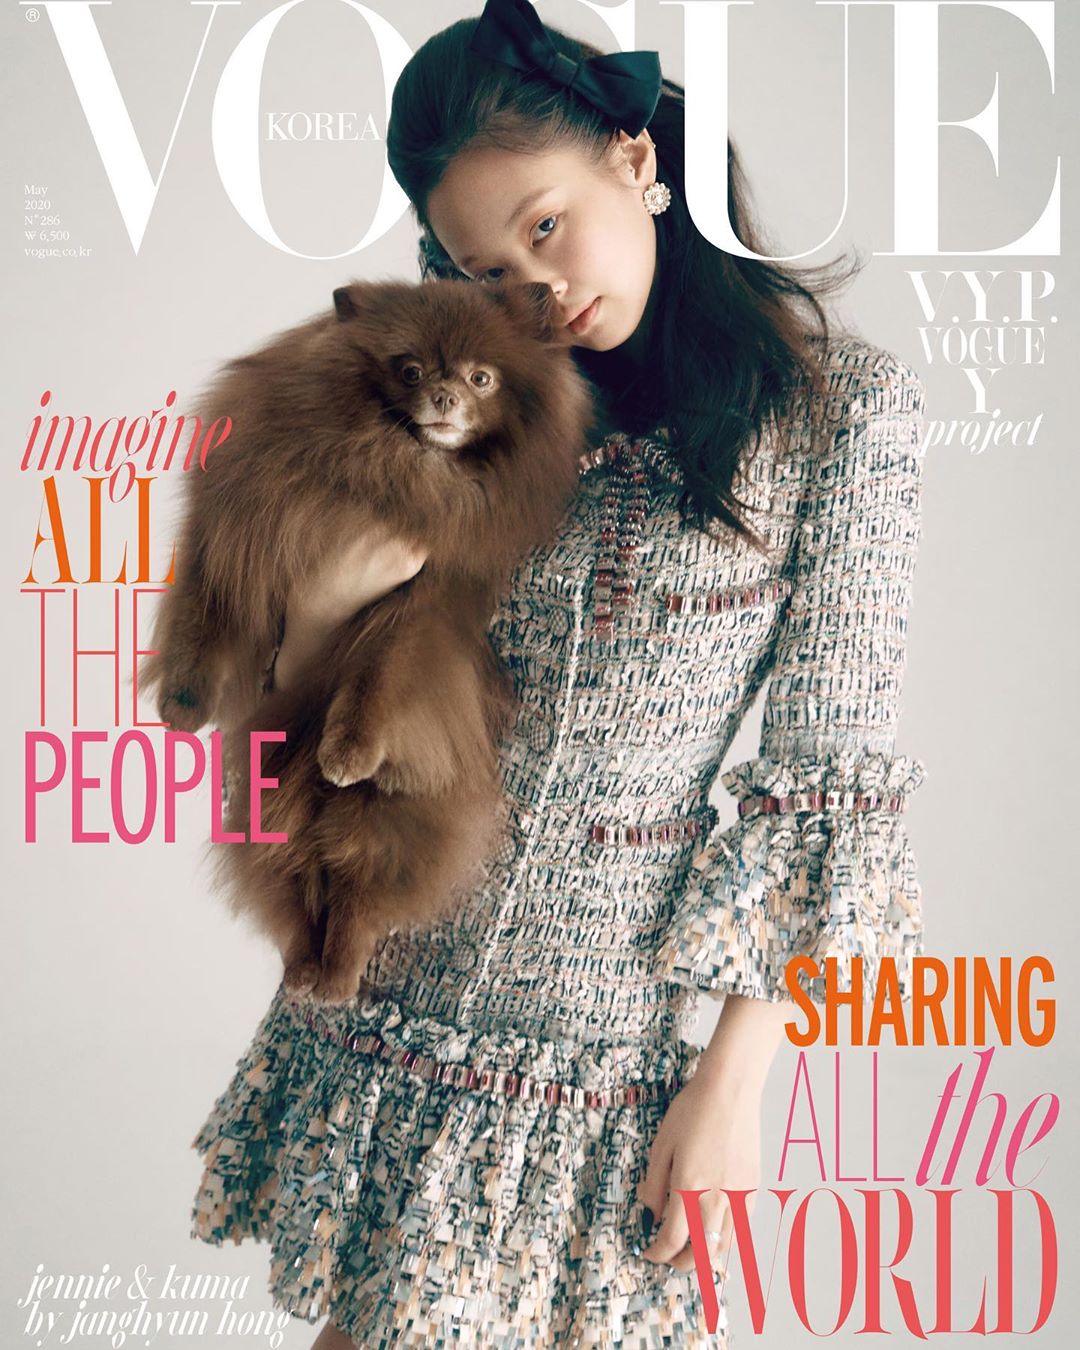 BLACKPINK's JISOO is the Cover Star of Vogue Korea April 2022 Issue